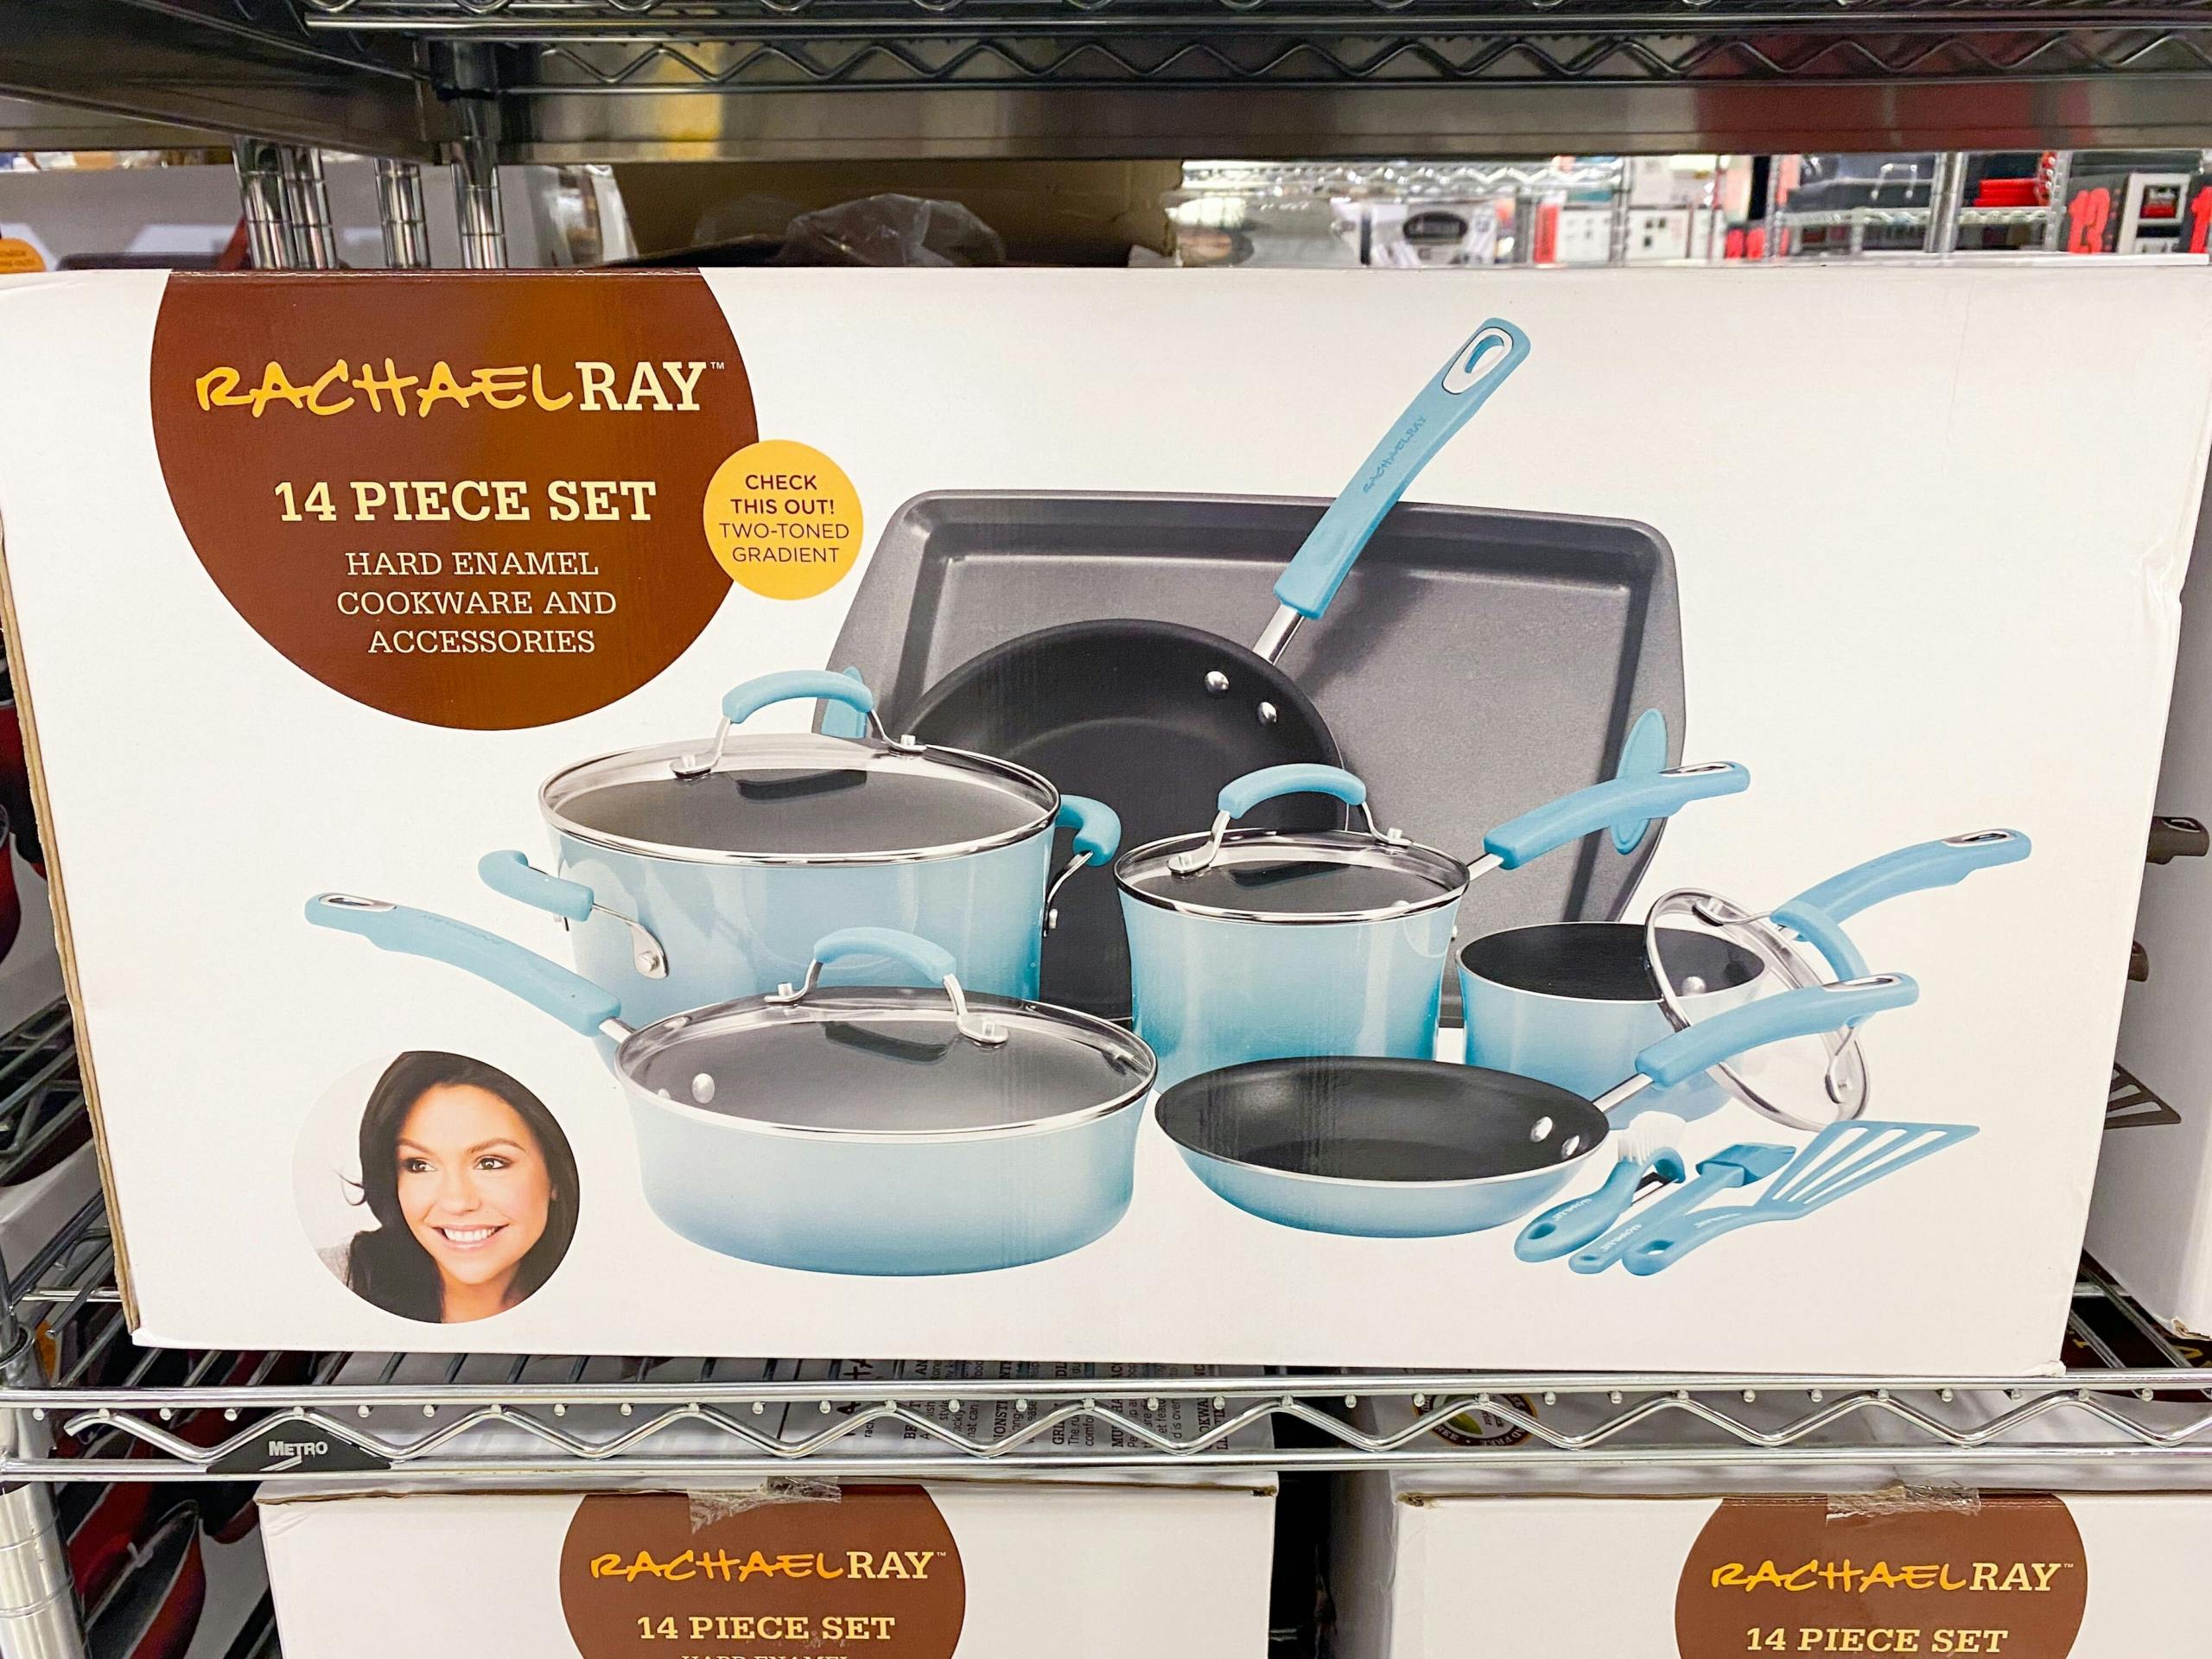 Rachael Ray 14 Pc Cookware Sets Macys 1631464446 1631464446 Scaled ?auto=compress,format&fit=max